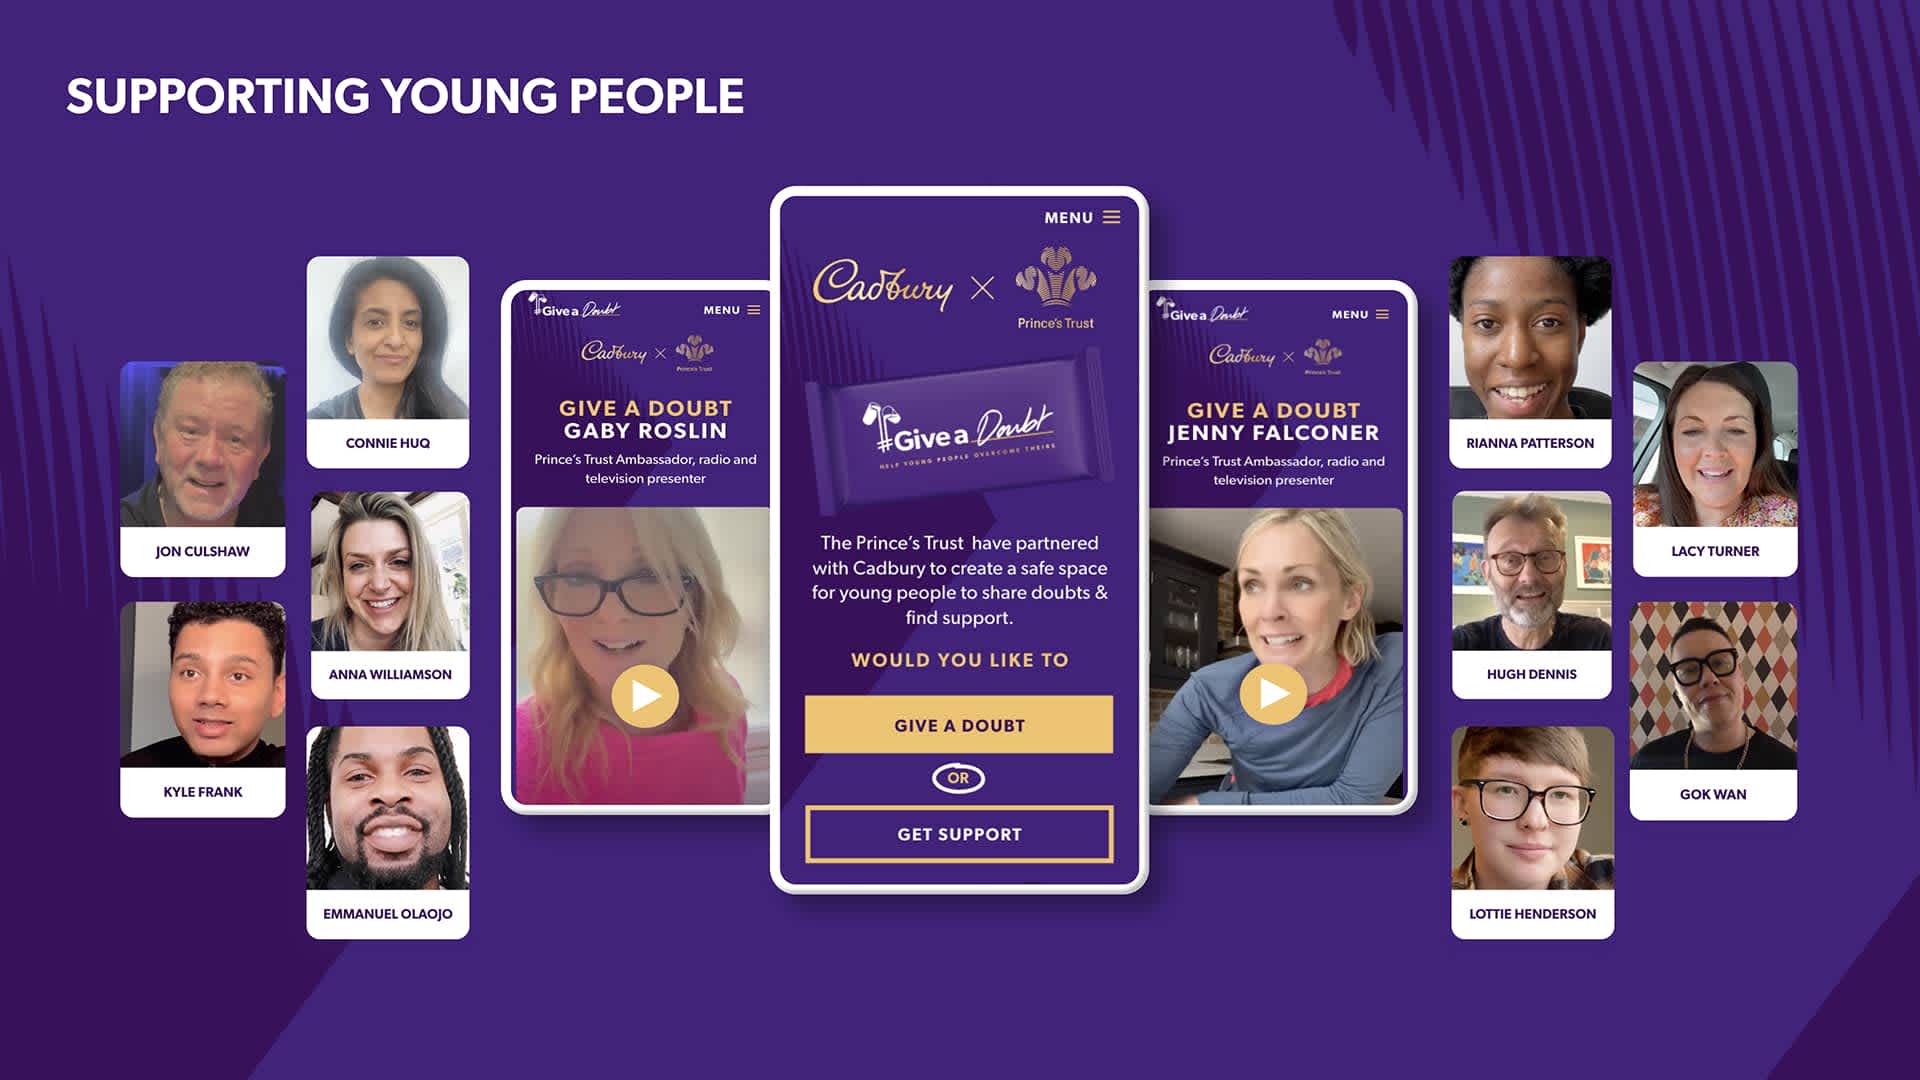 Screenshot of the Cadbury campaign supporting young people #Give a Doubt.